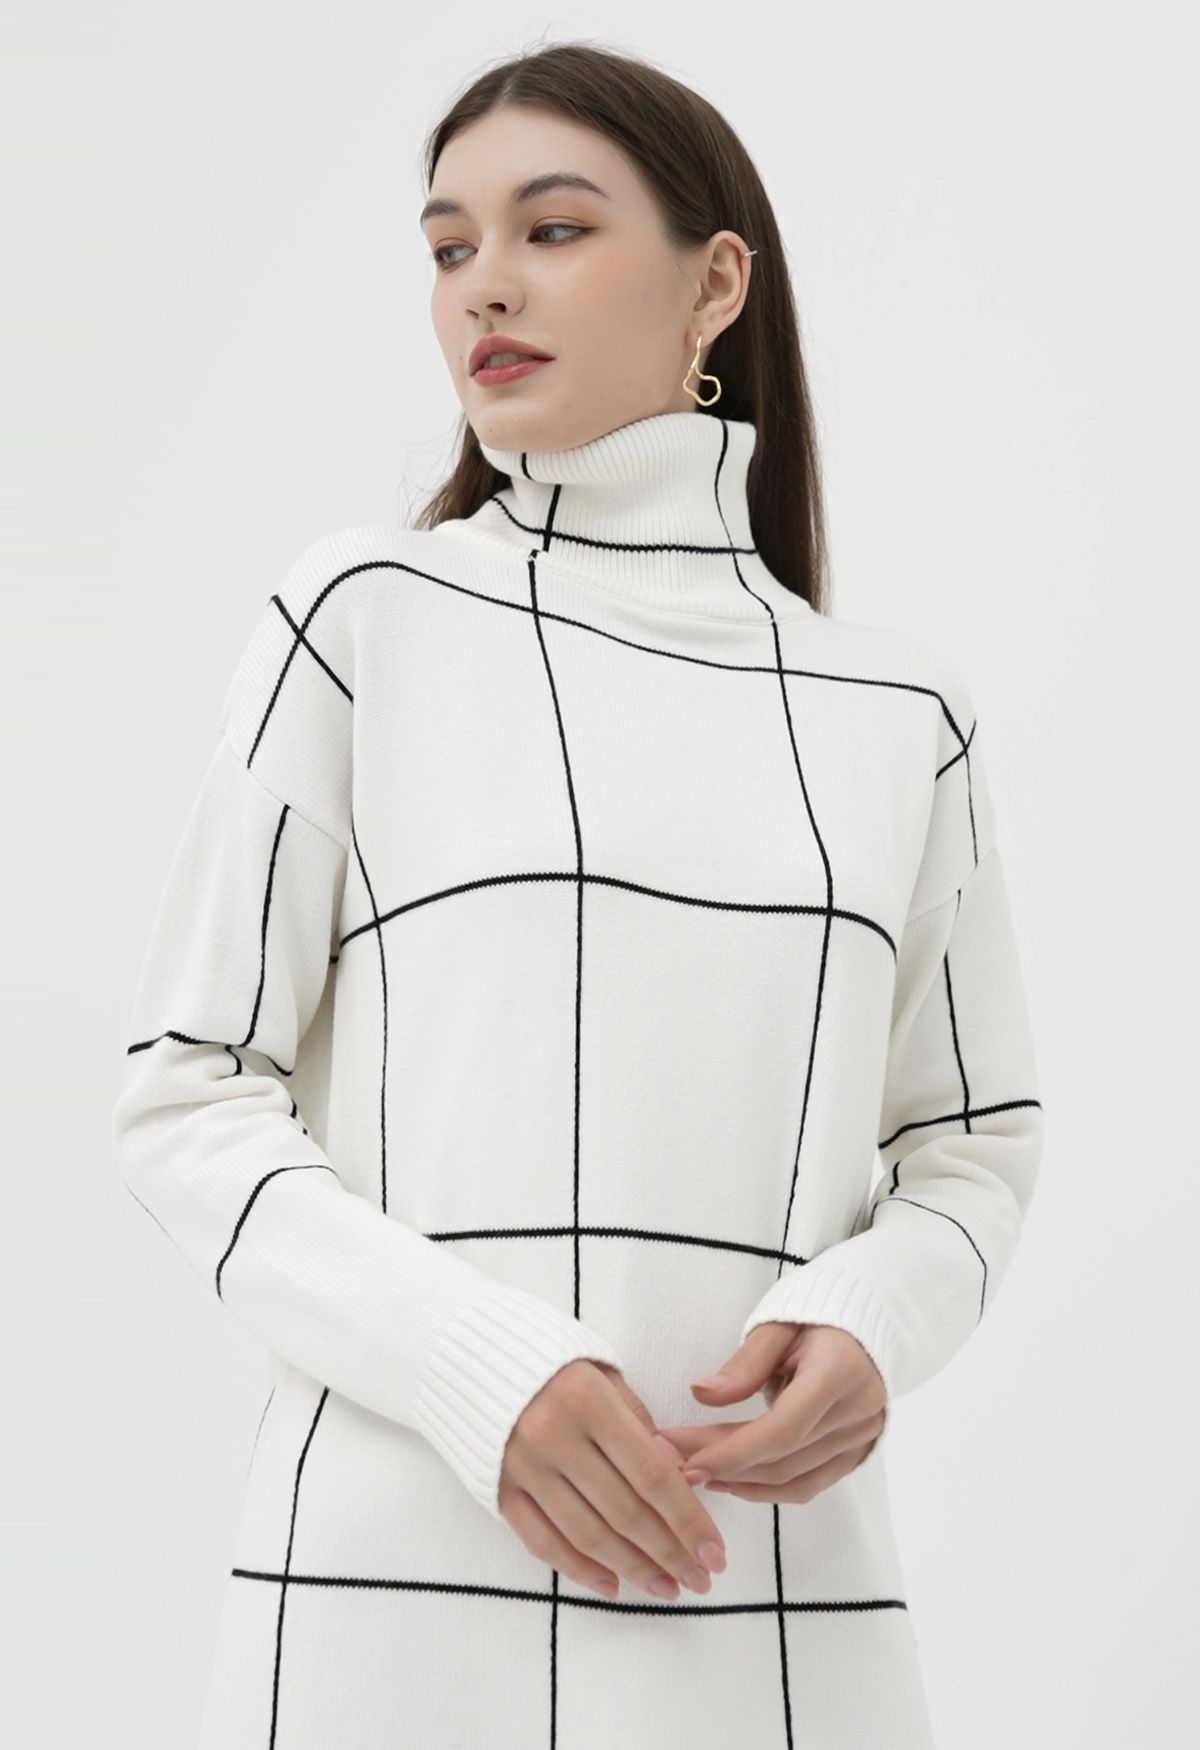 Click for outfit details //Black and white geometric turtleneck